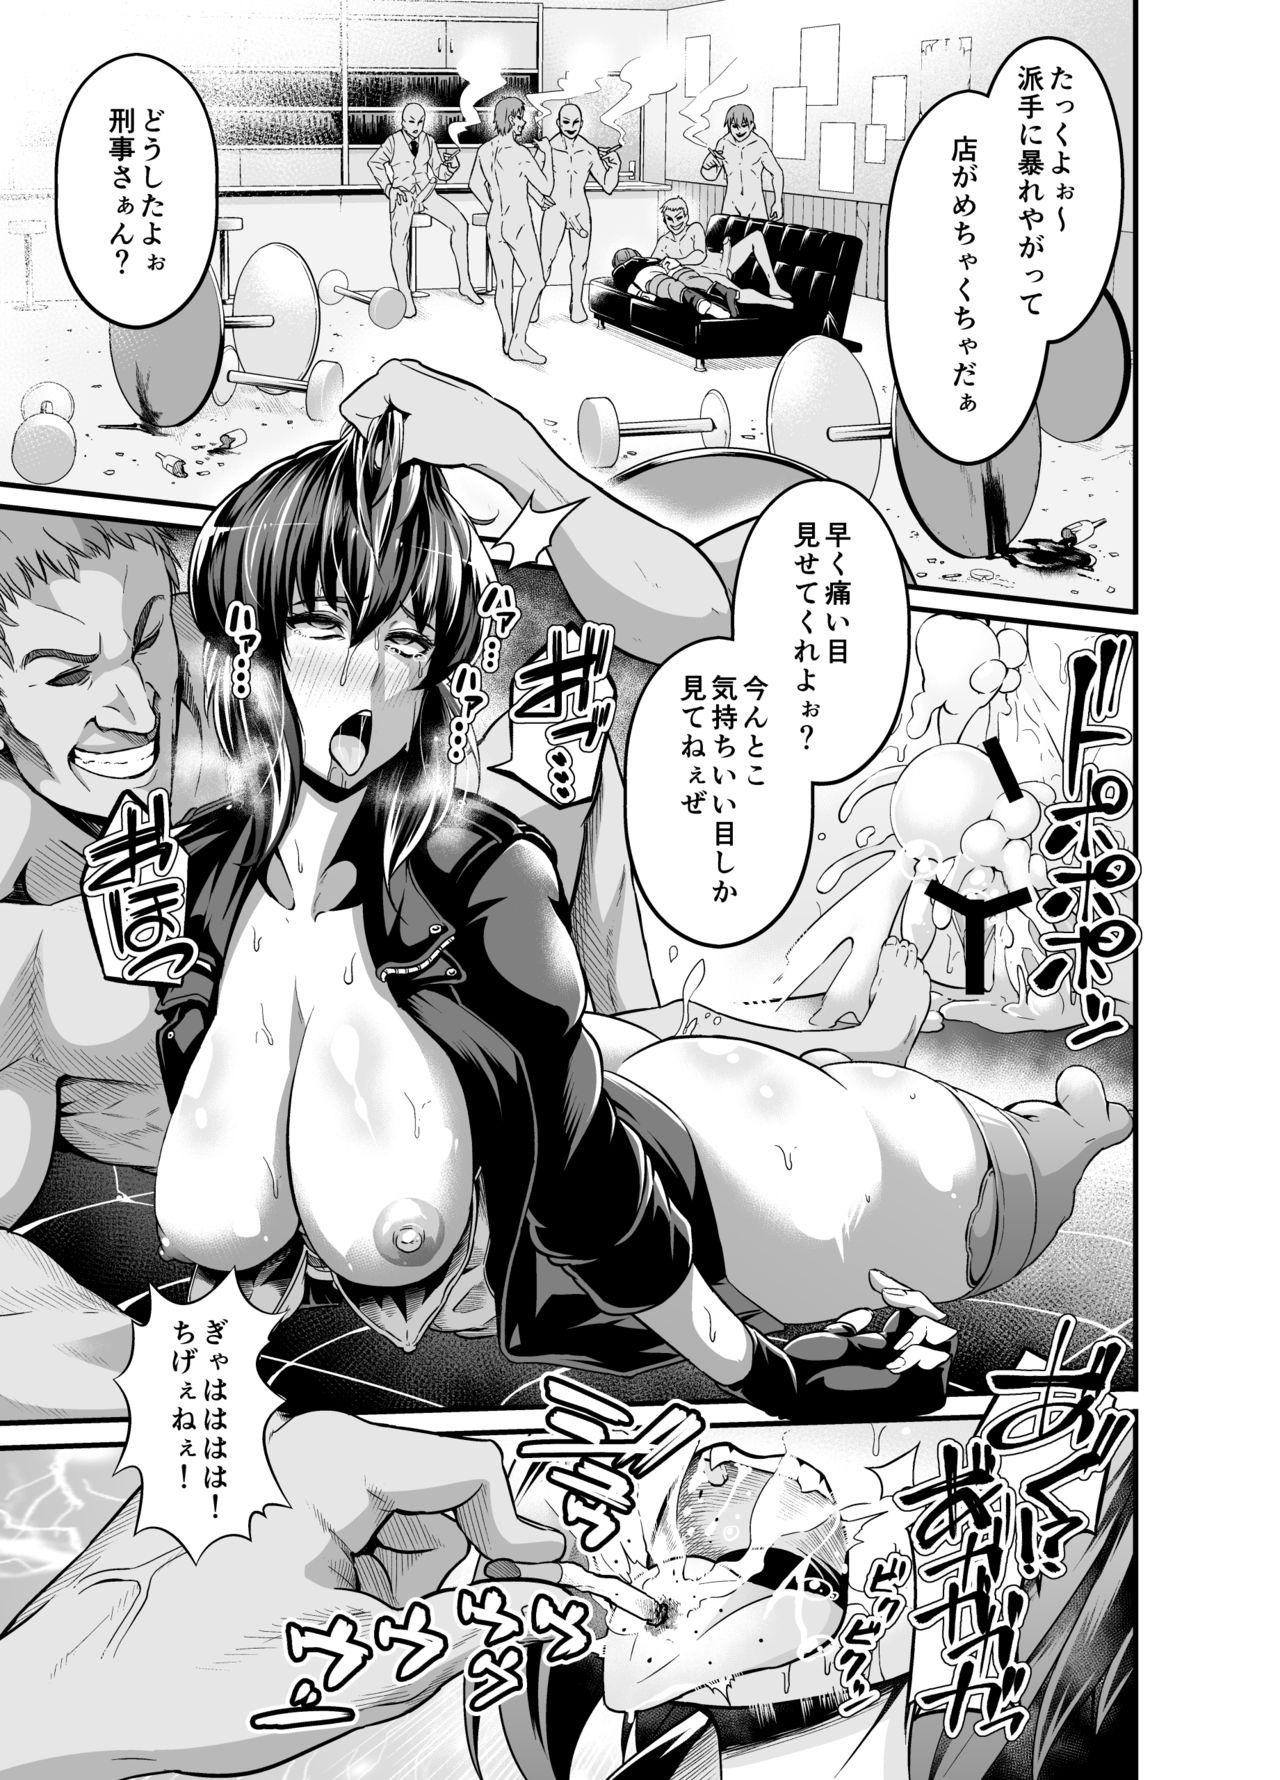 Short Hair SSS 14.5 - Ghost in the shell Housewife - Page 6